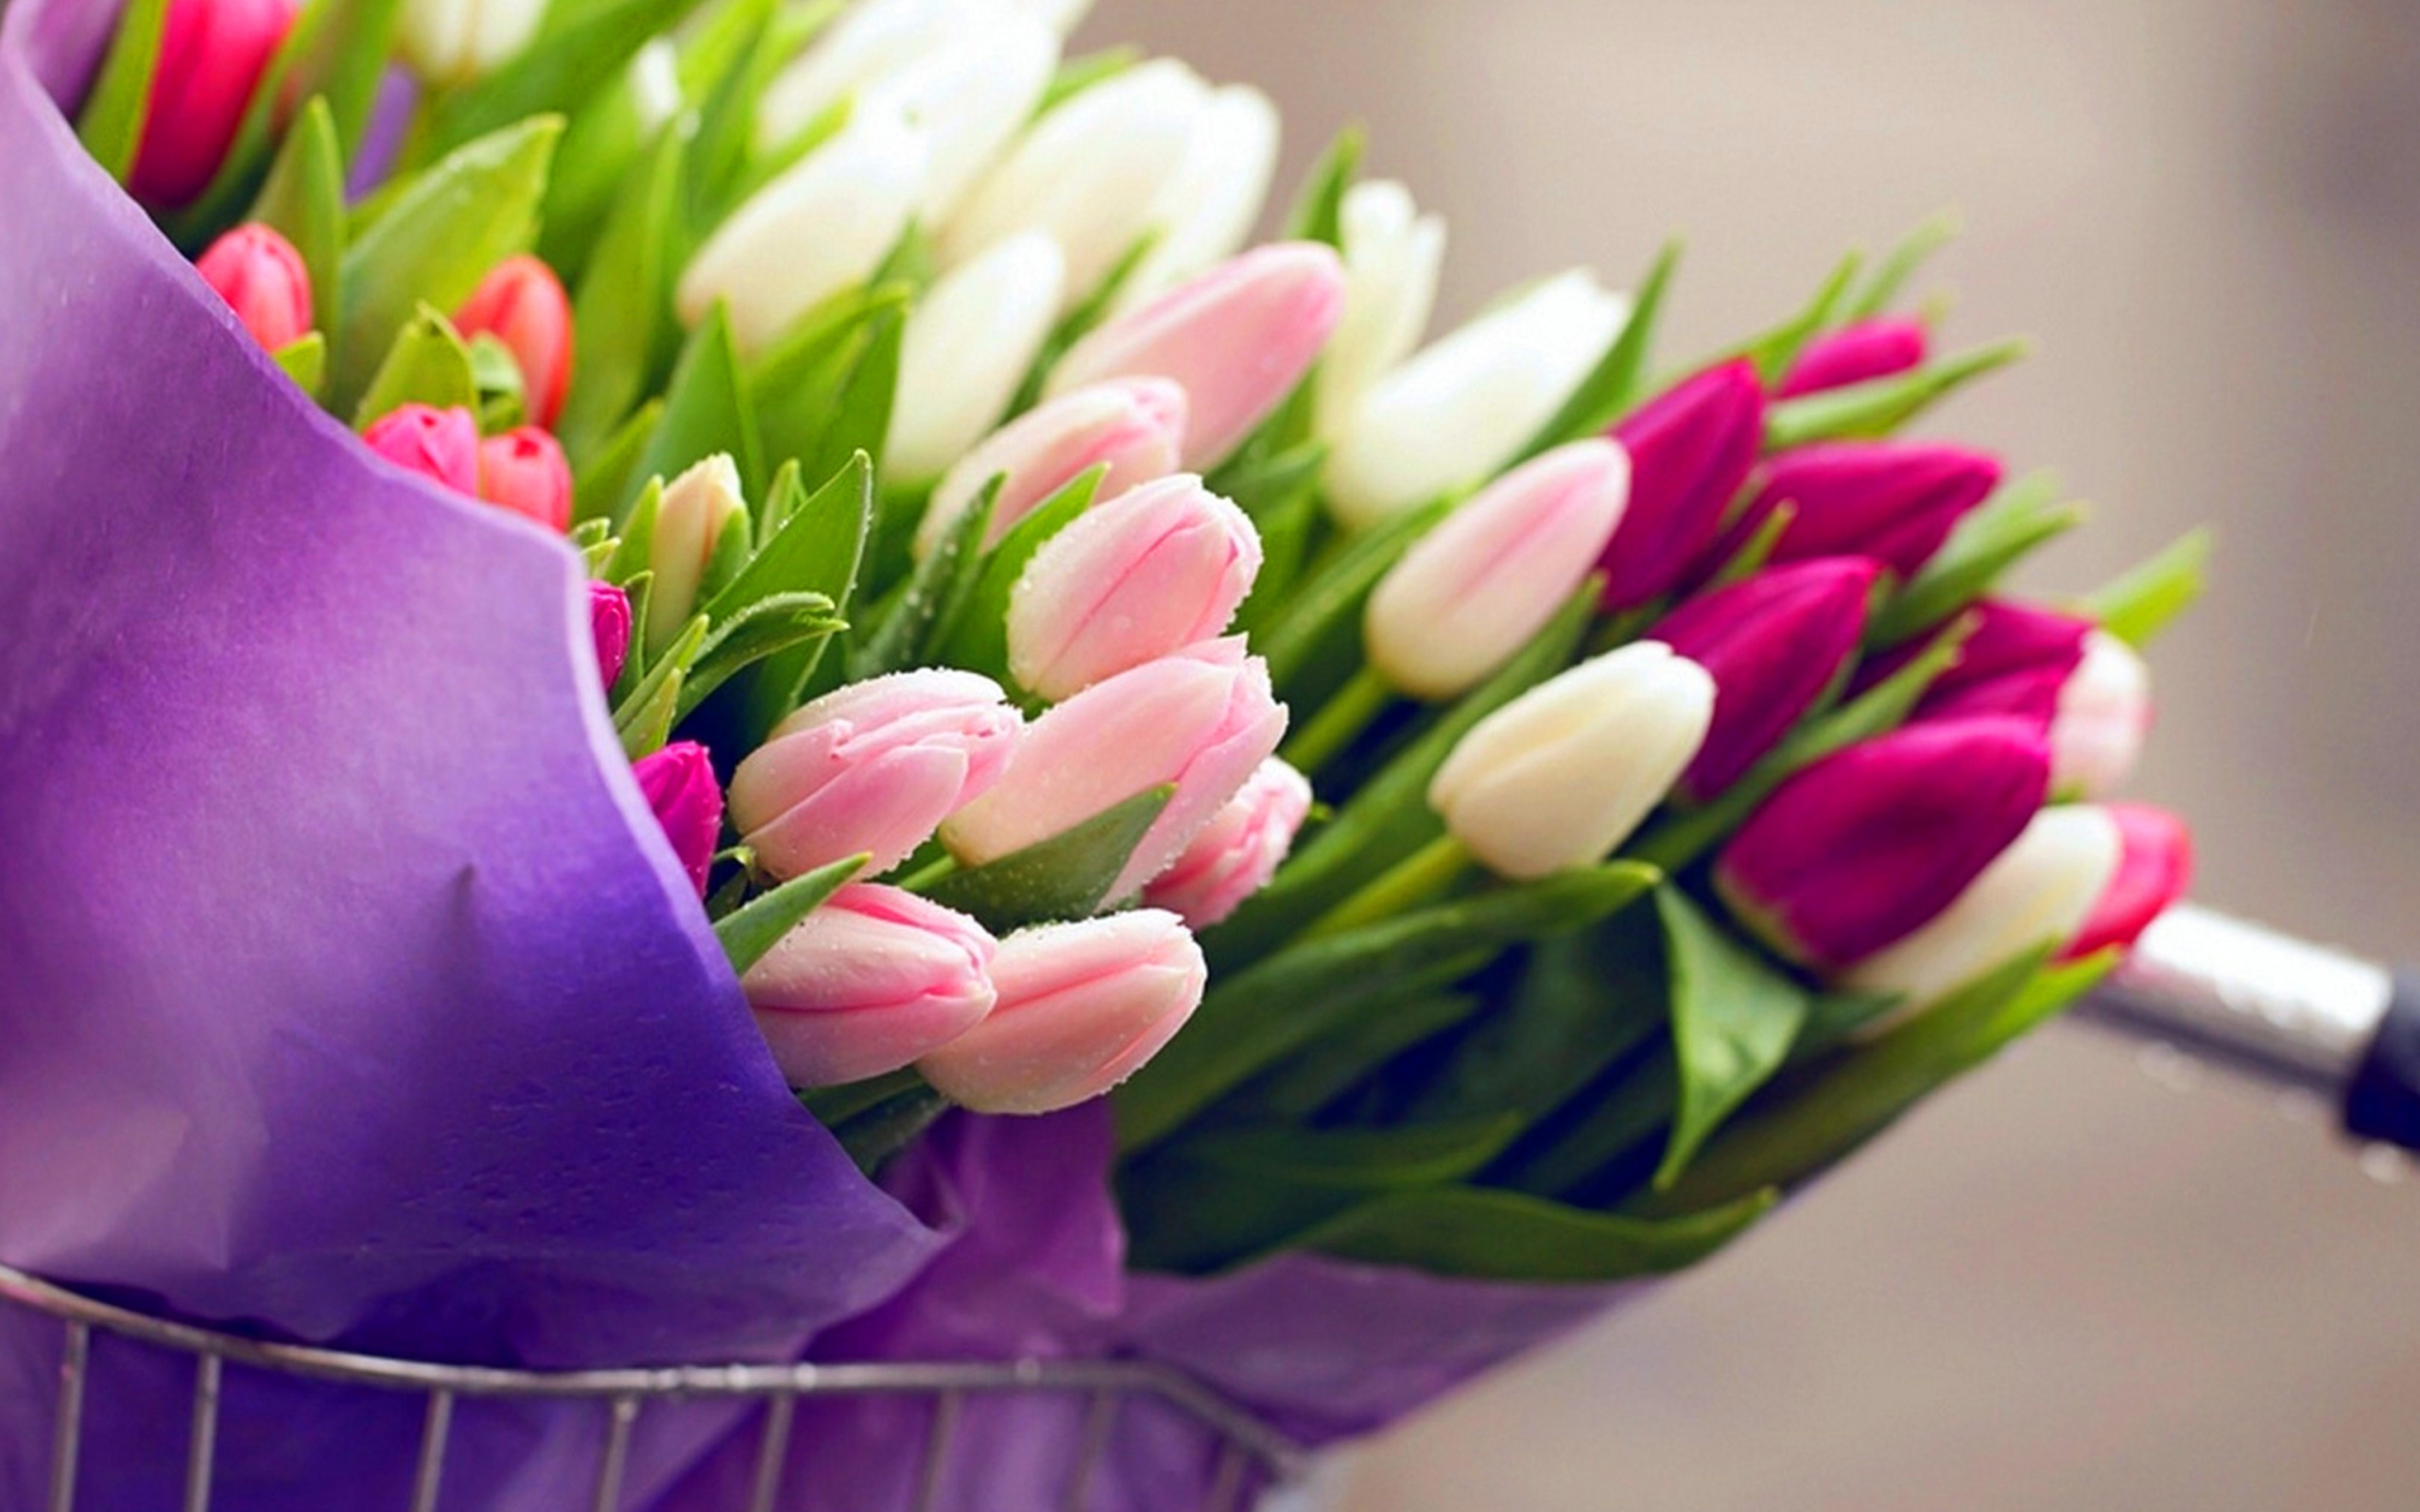 Tulips for You wallpaper 2560x1600